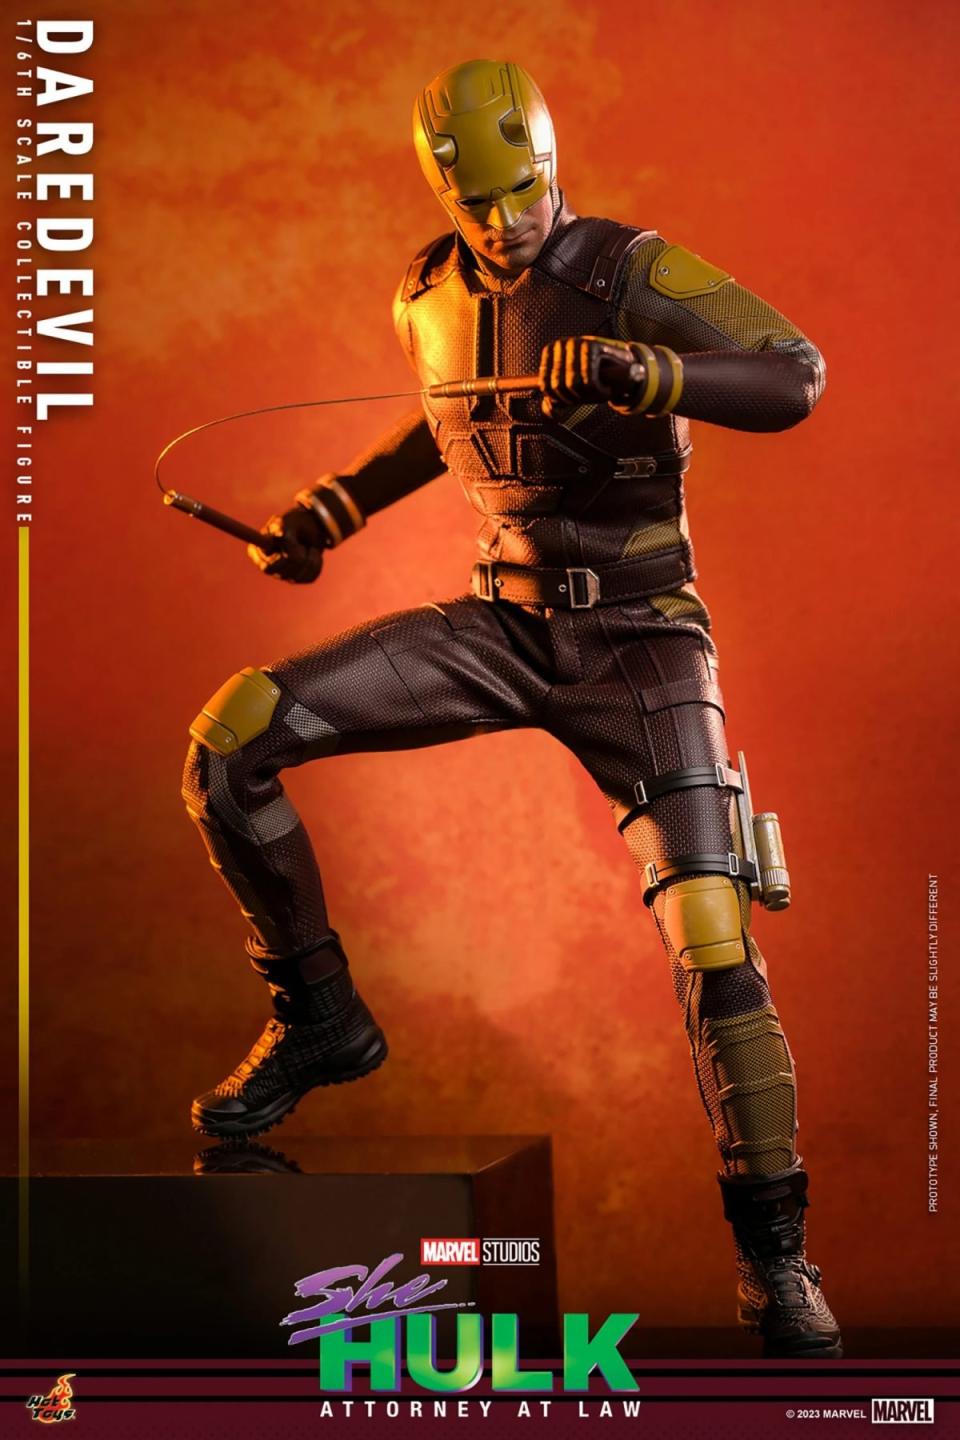 Hot Toys Daredevil with his yellow and red She-Hulk costume in an action pose